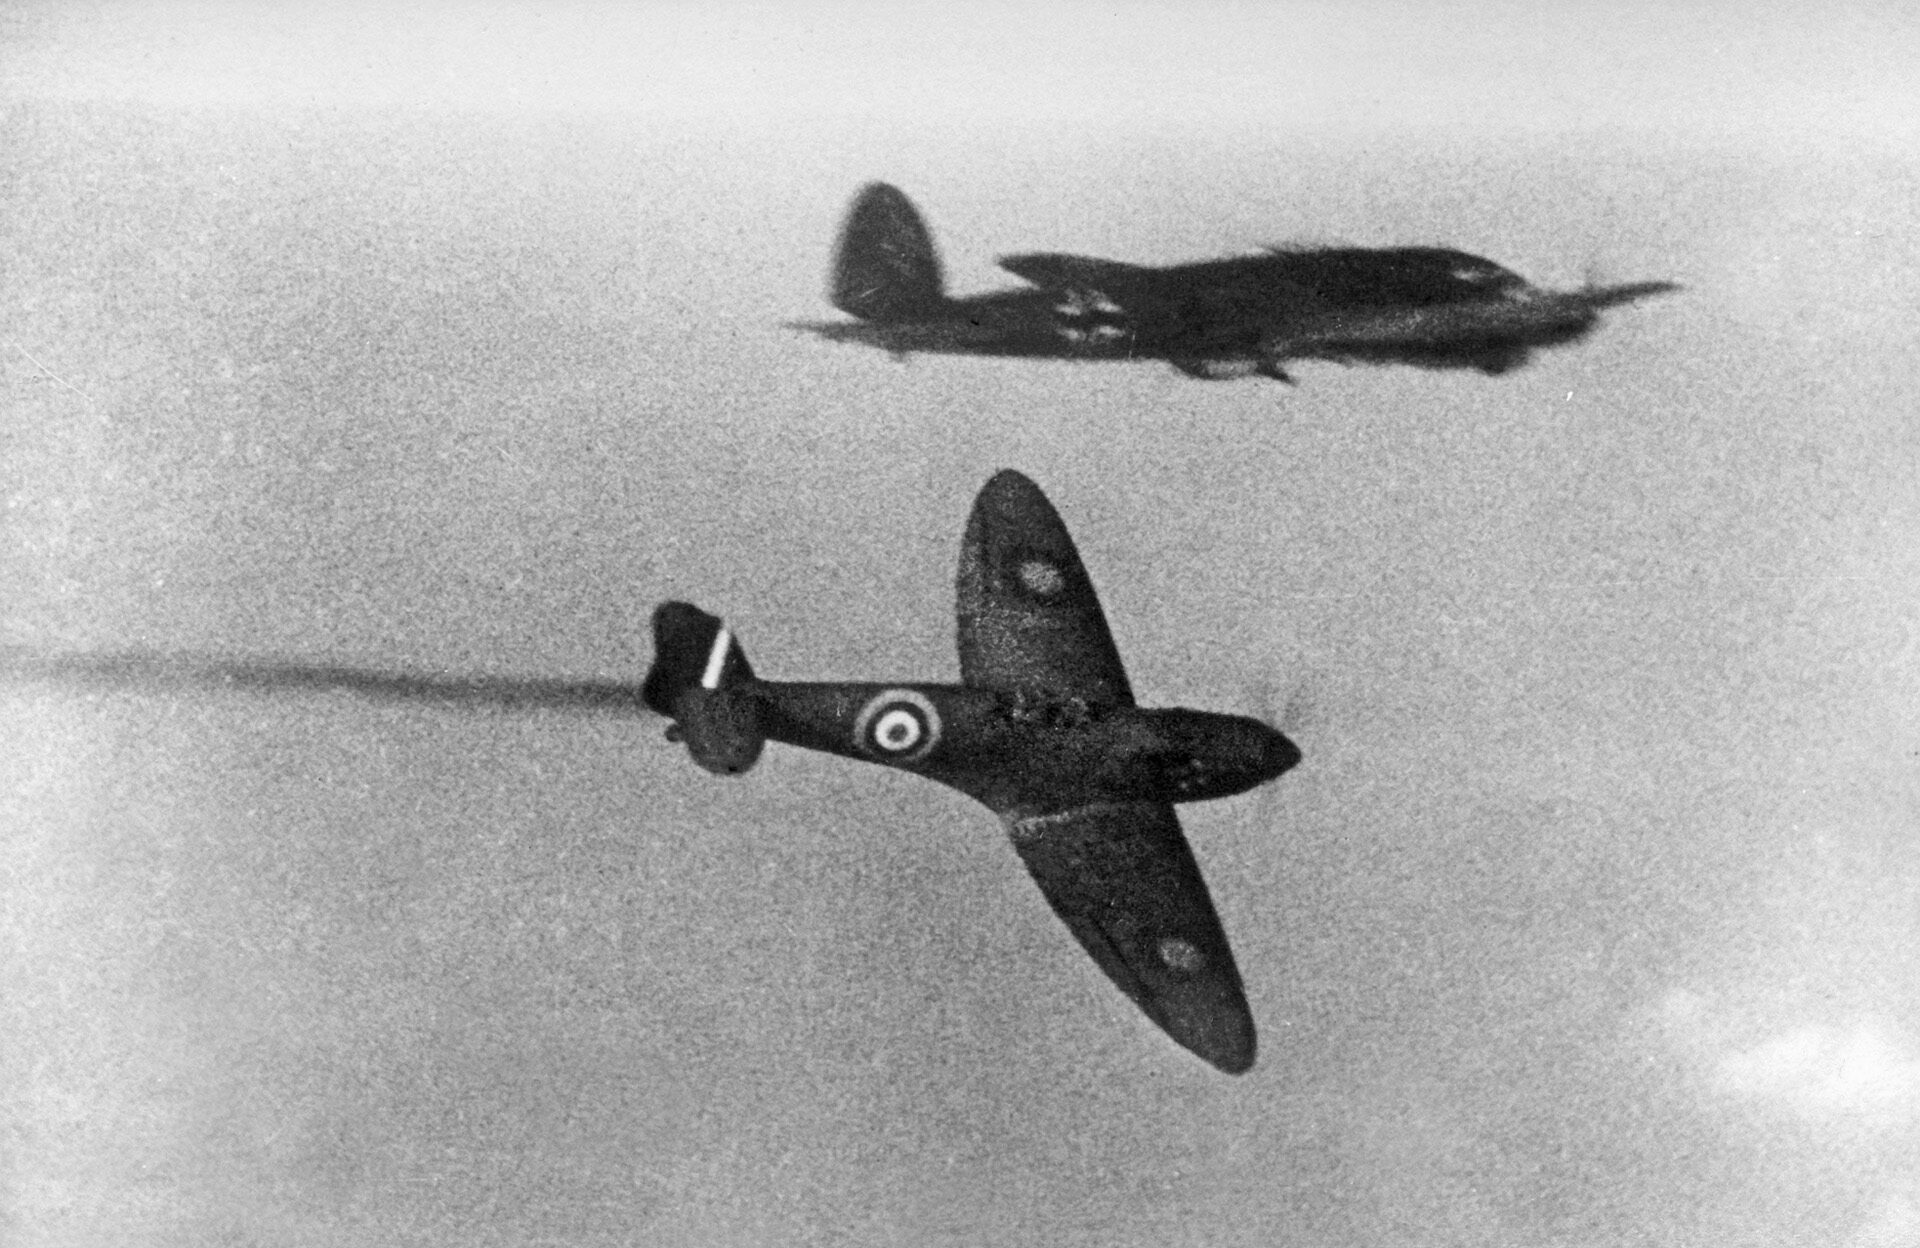 A Spitfire, trailing smoke, peels away after having engaged a Heinkel He-111 over the Channel.